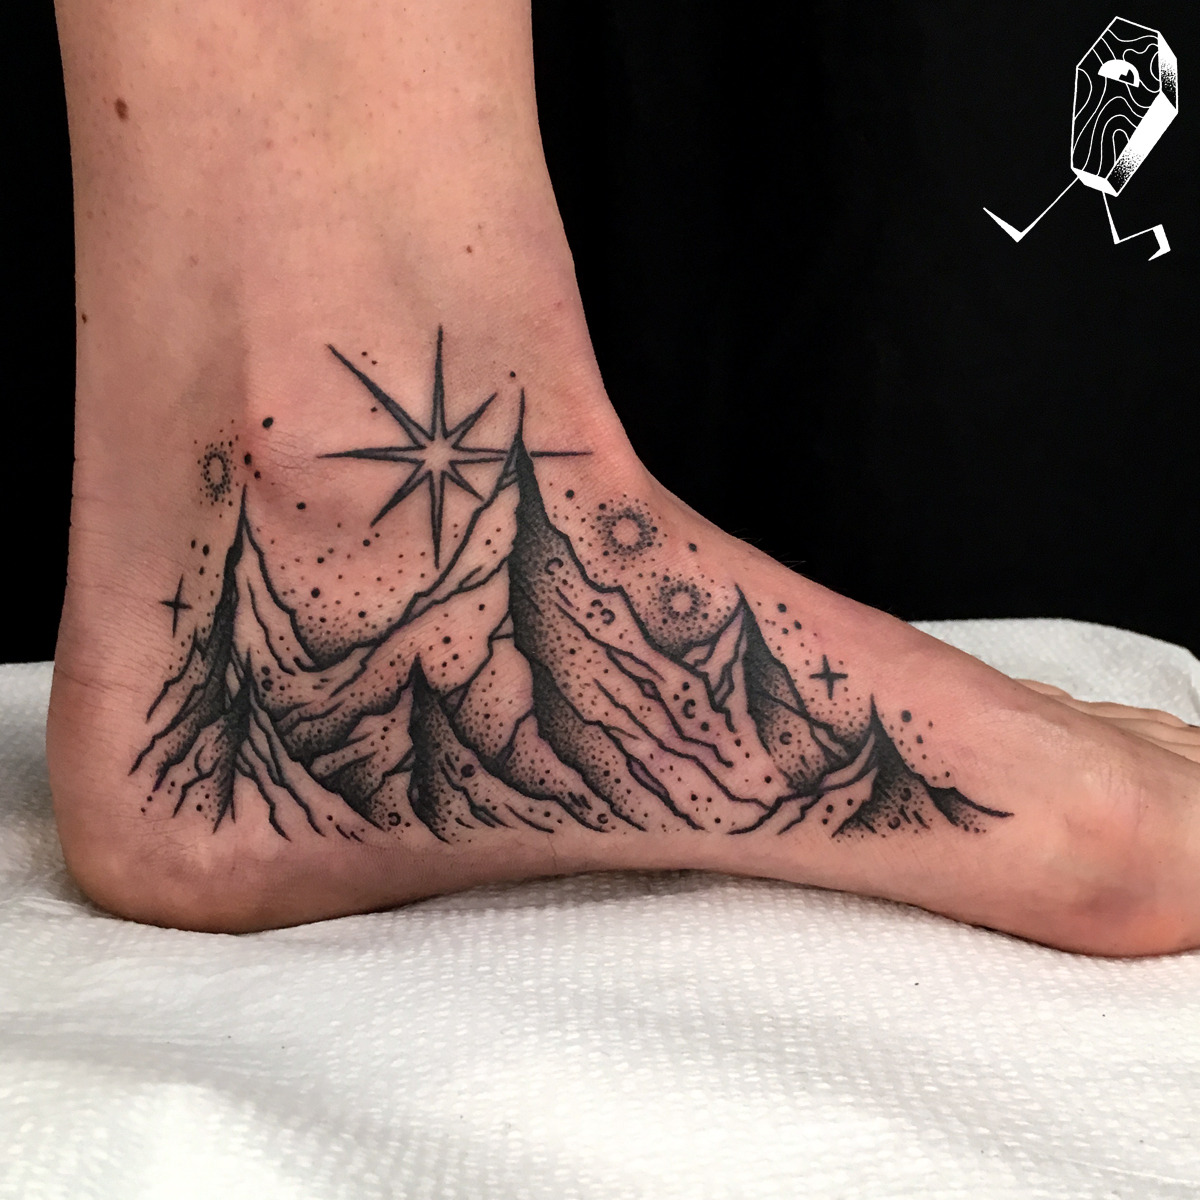 Mountain tattoo located on the ankle